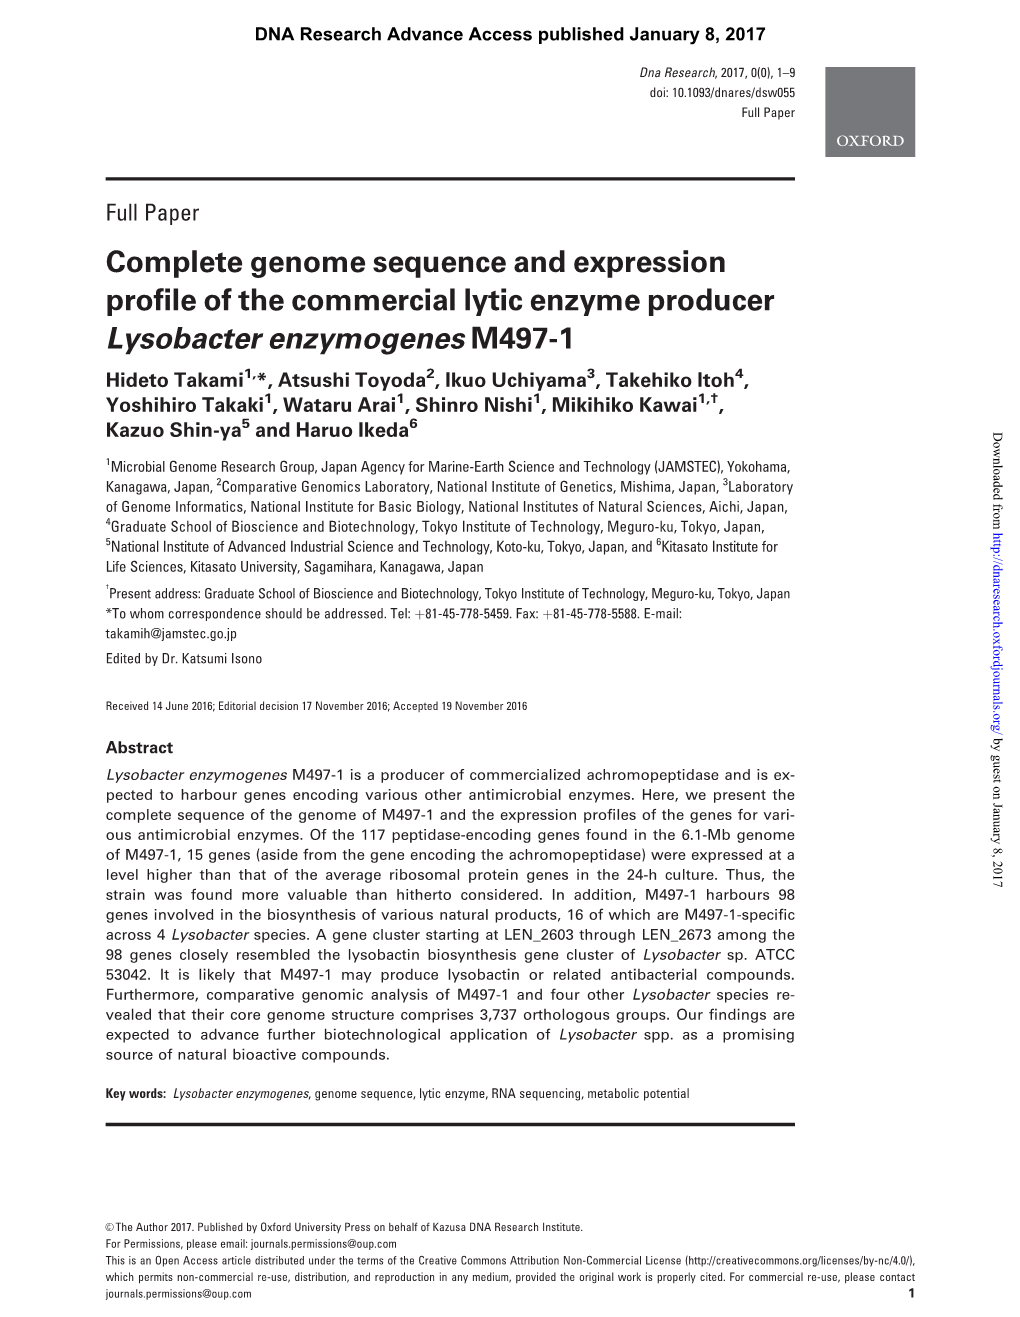 Complete Genome Sequence and Expression Profile Of